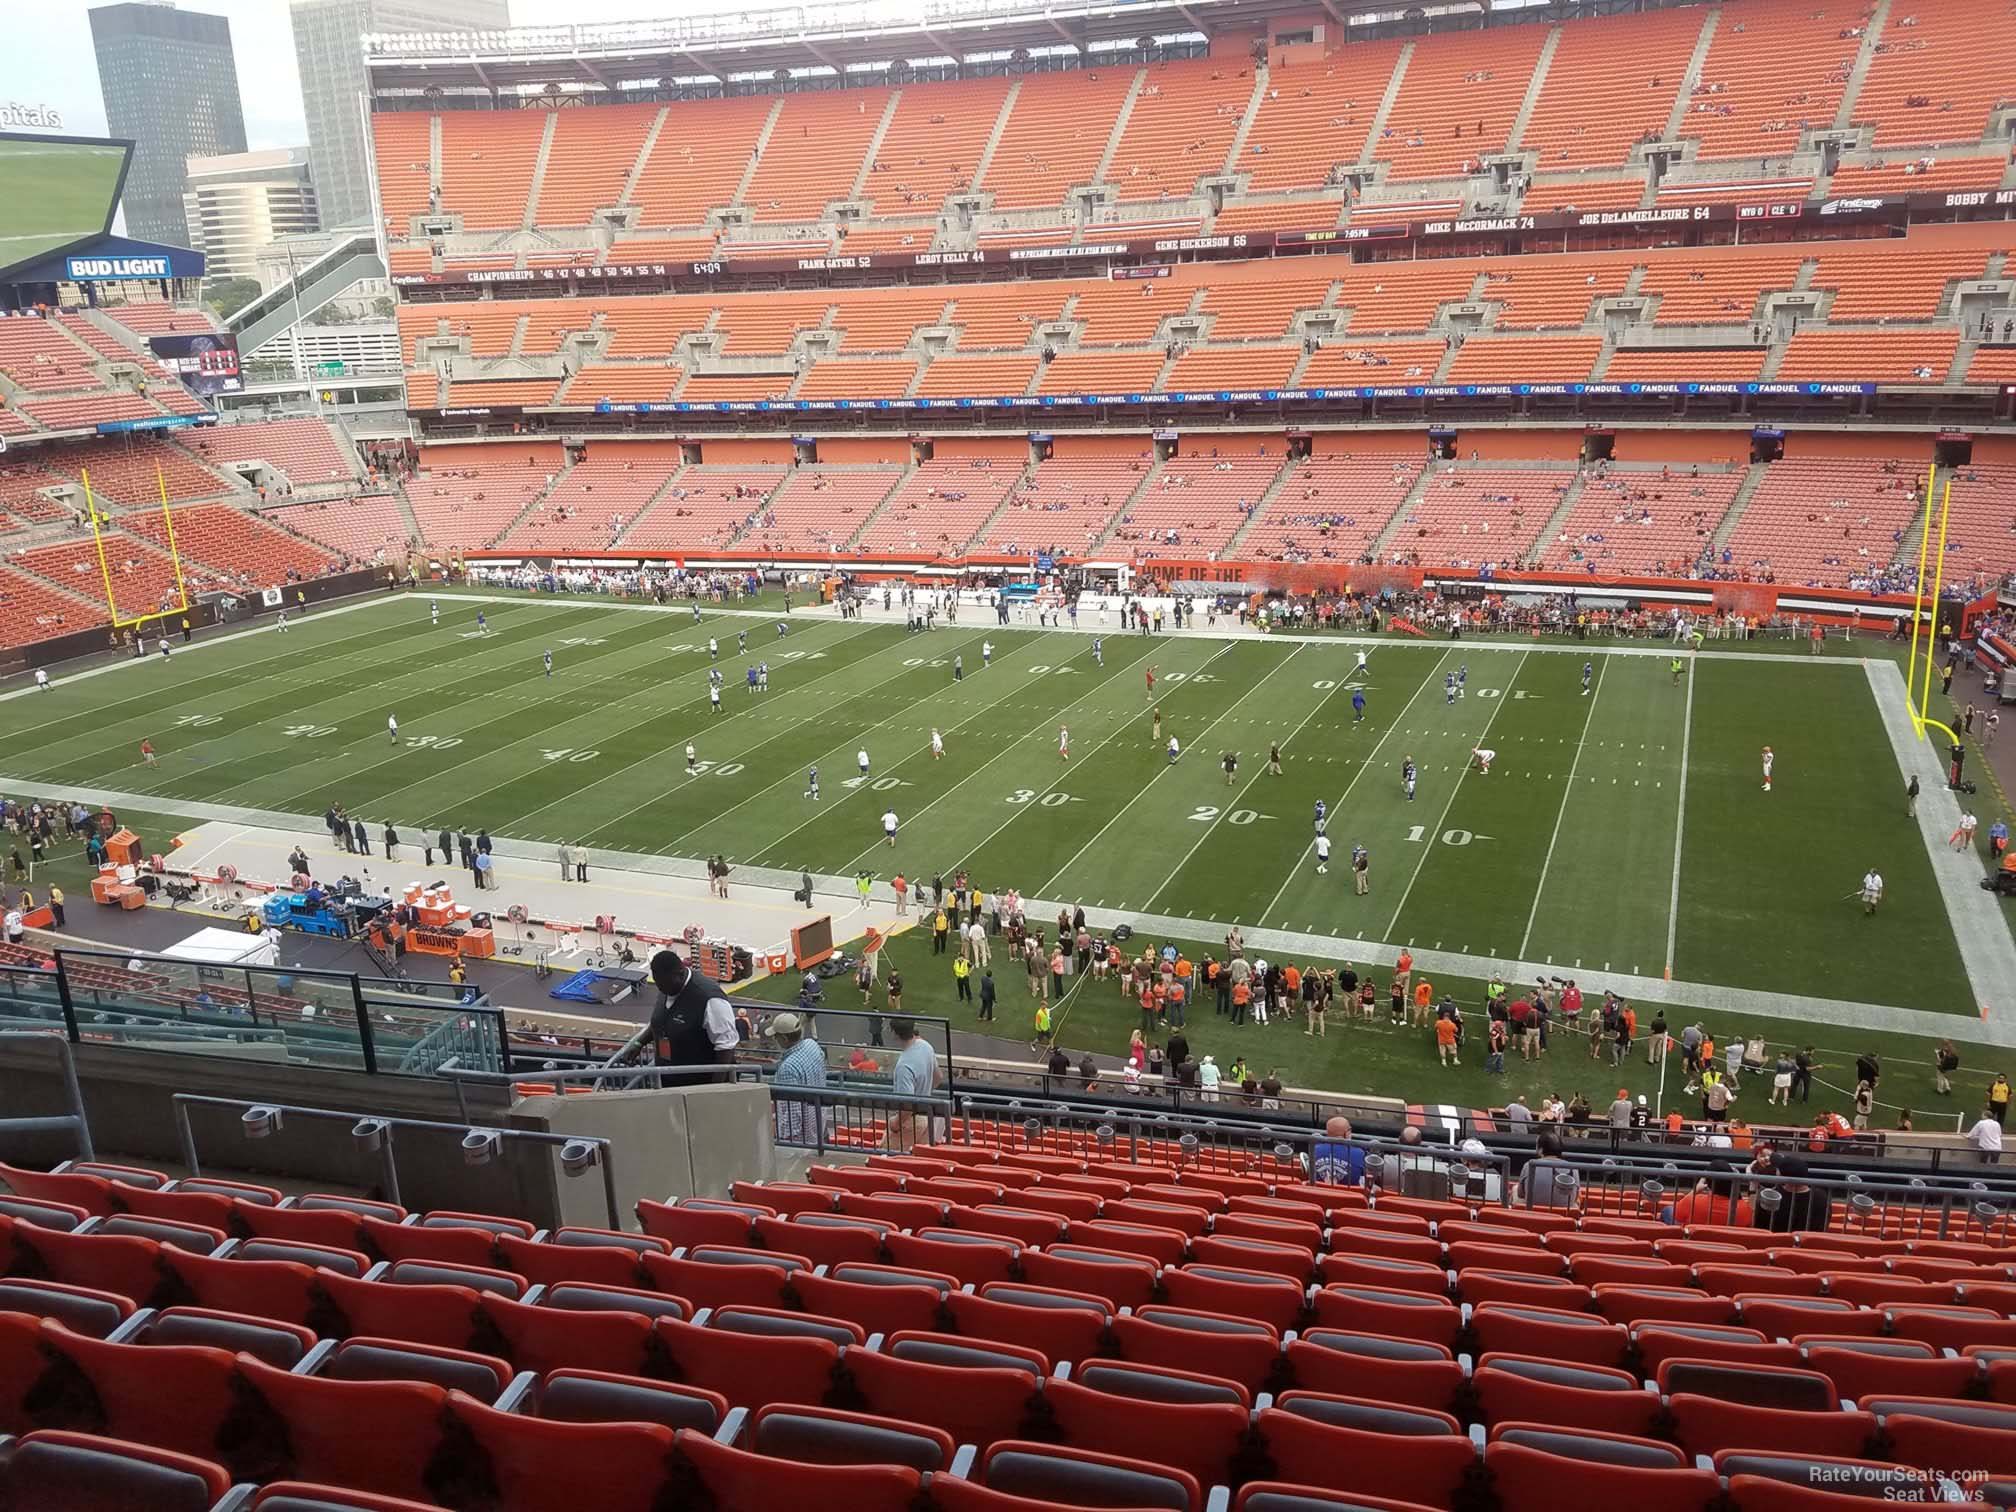 section 337, row 18 seat view  - cleveland browns stadium